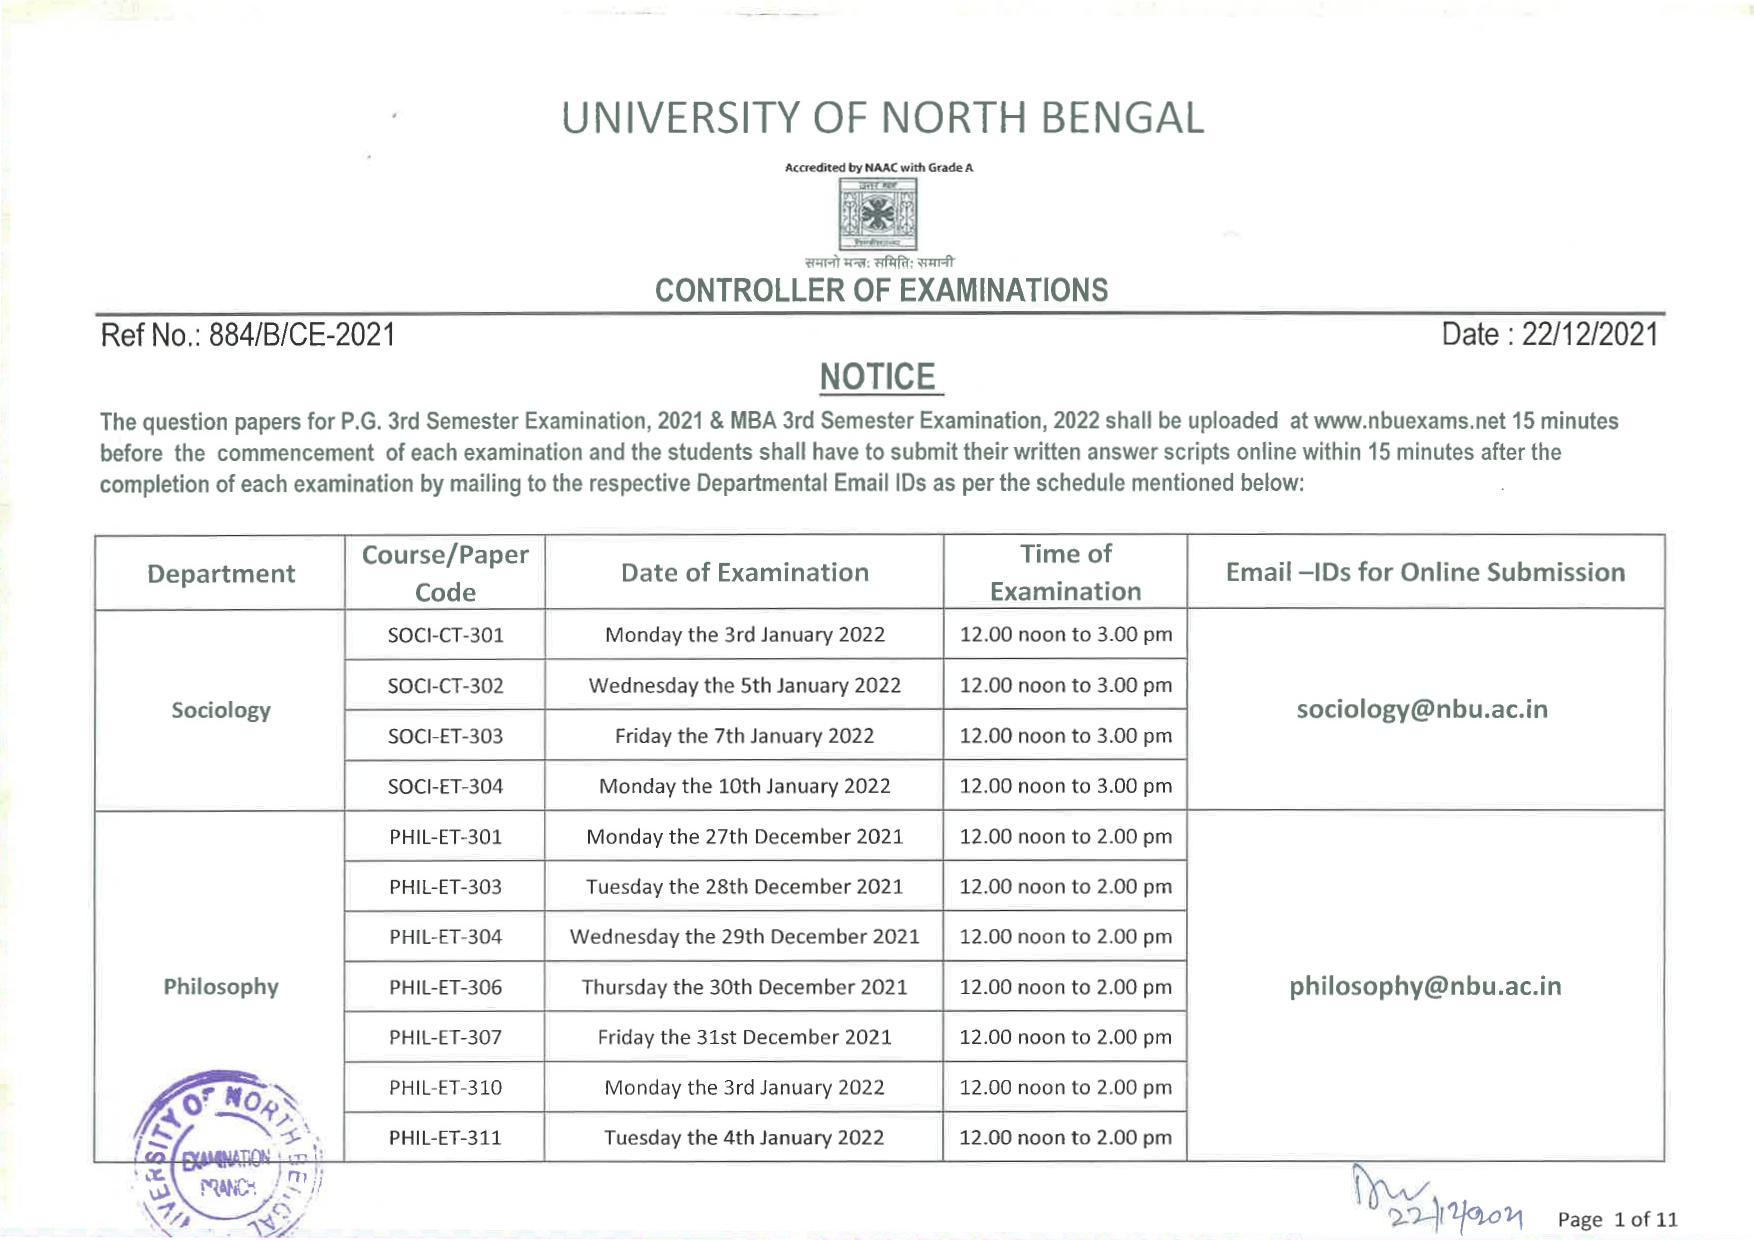 EXAM SCHEDULE FOR LL.M SEMESTER III (PAGE 1)